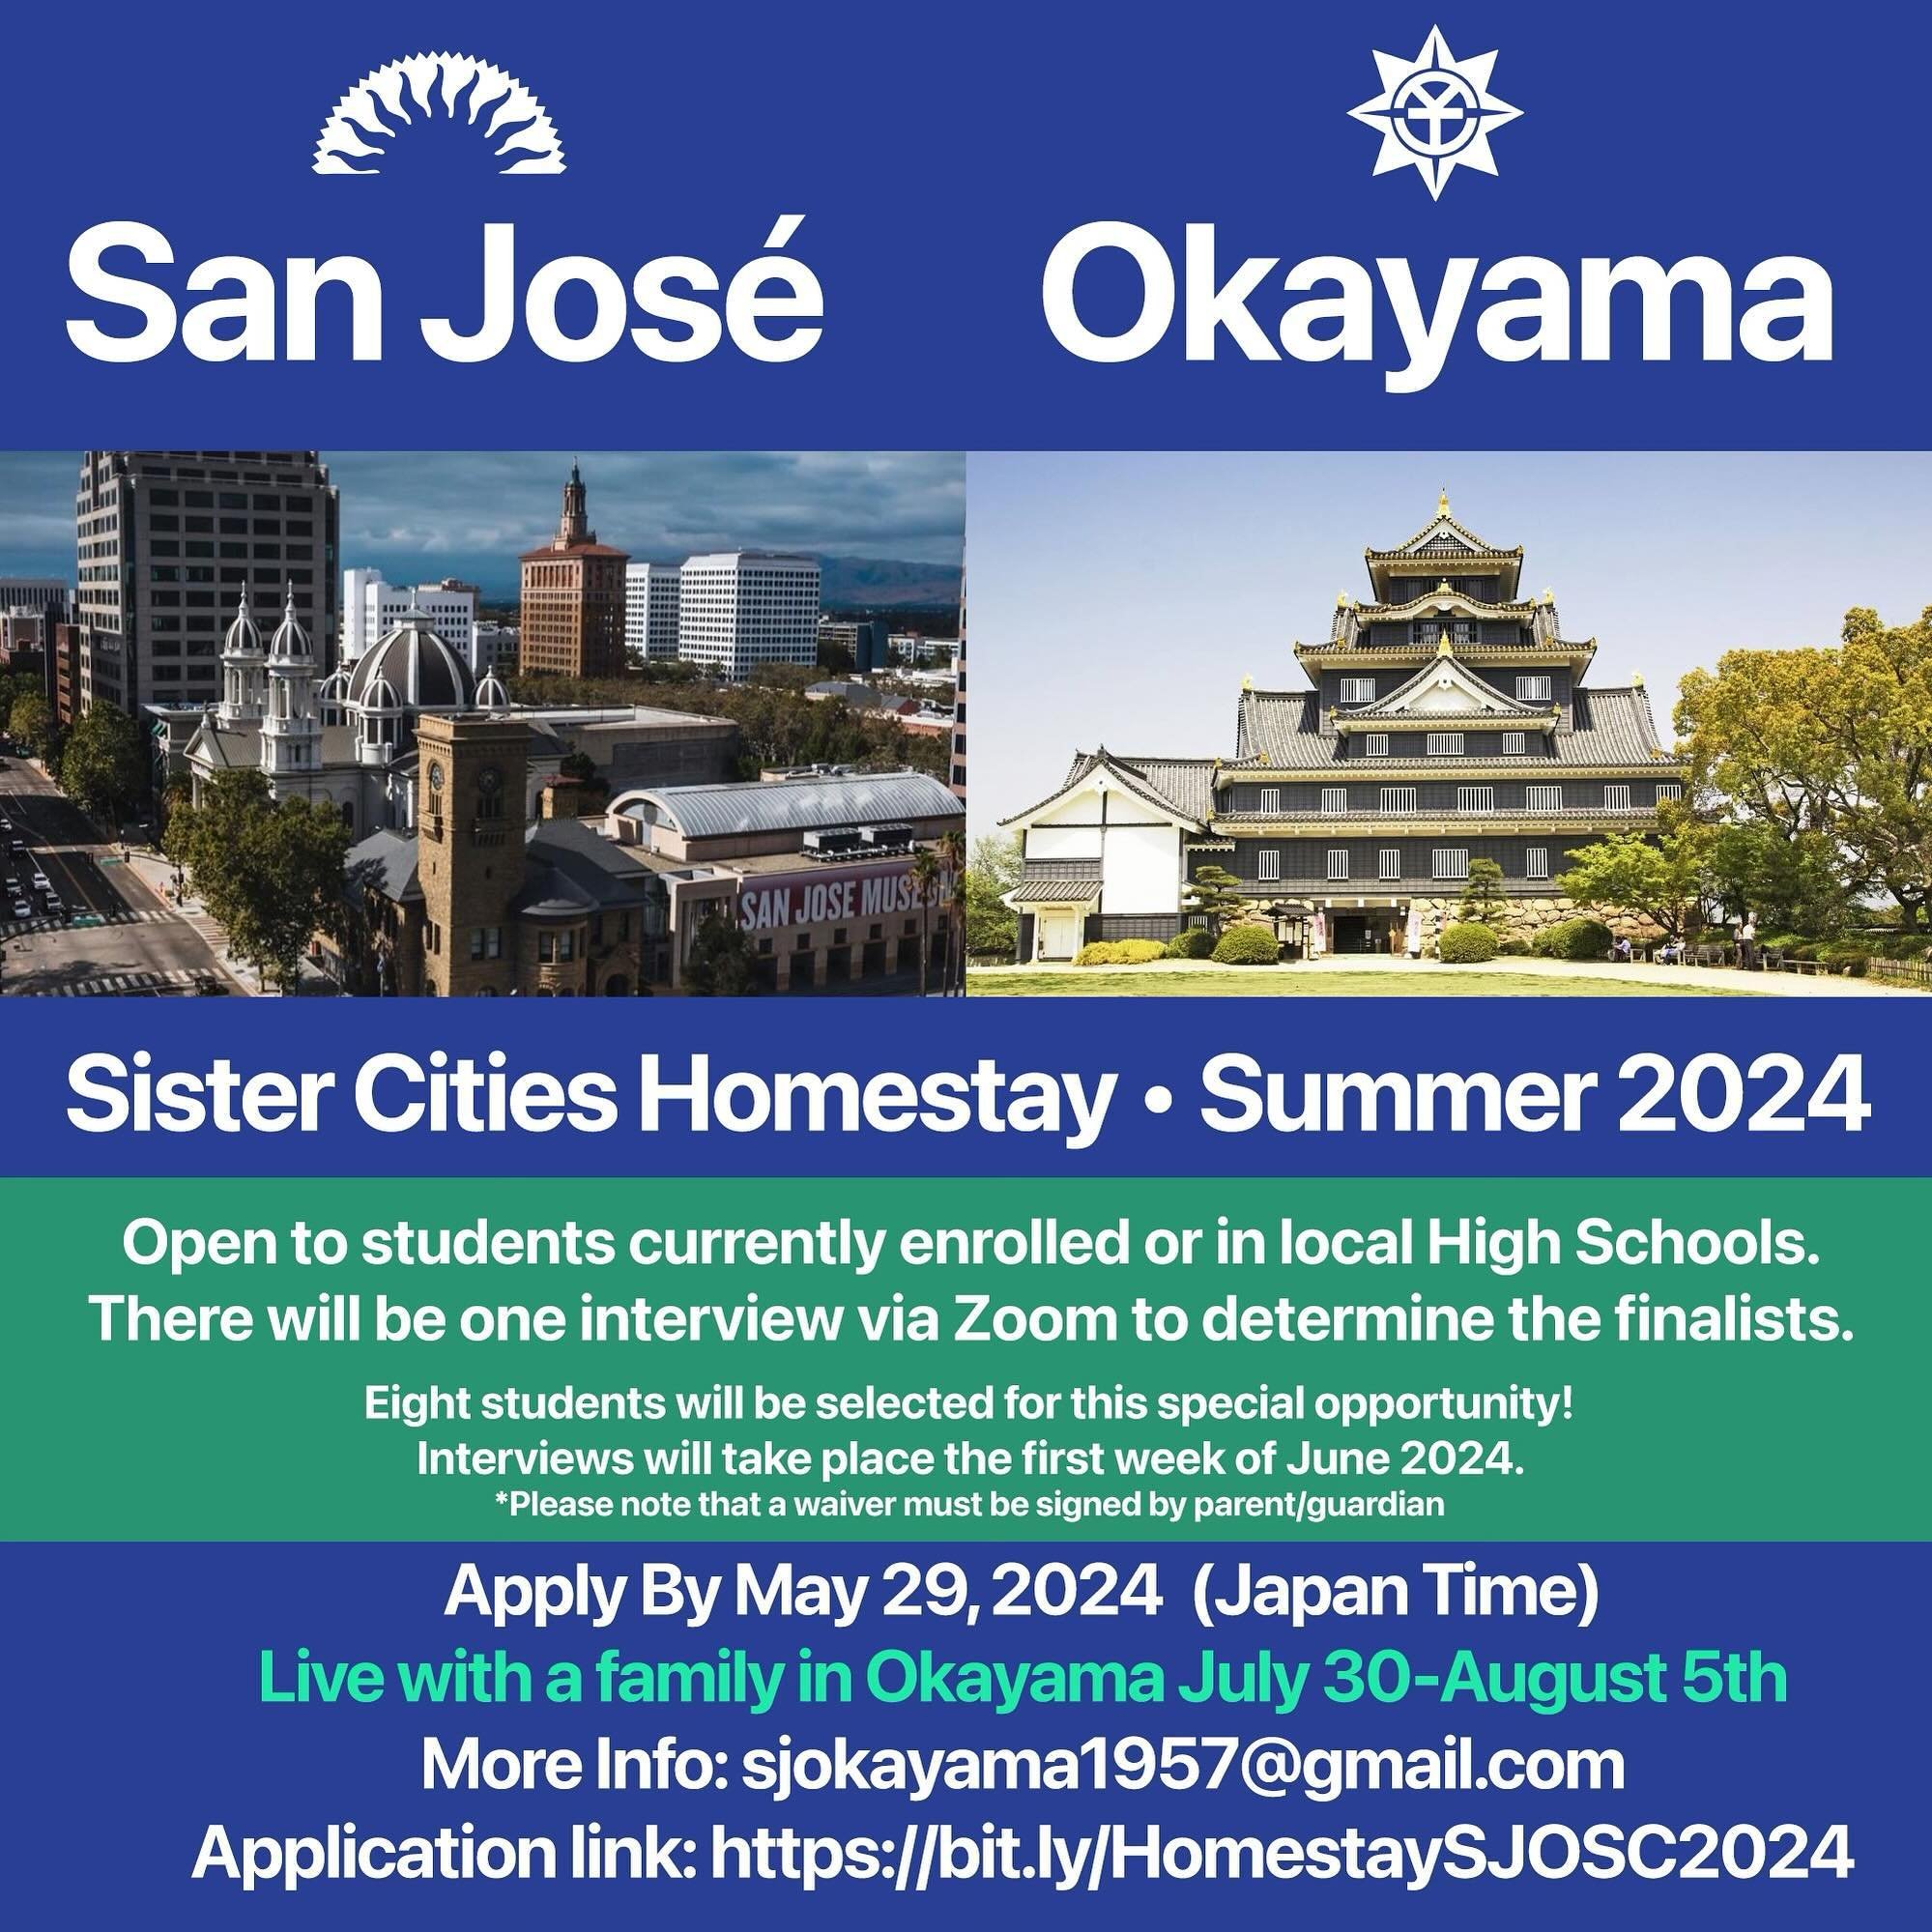 Calling adventurous high school students! Apply for your chance to travel to Japan and stay with a family in Okayama this summer as part of the Sister Cities Homestay Program!